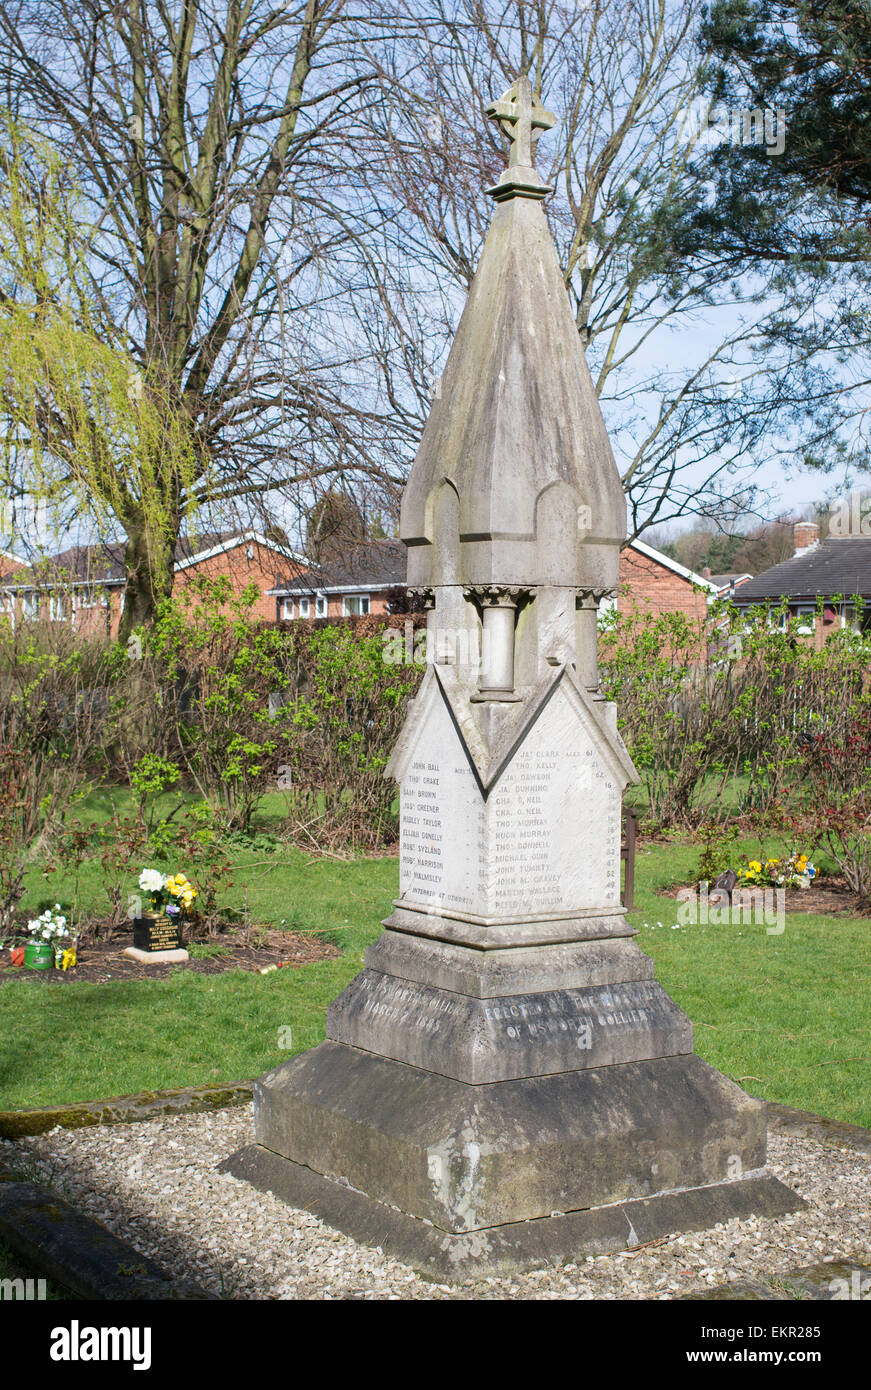 Usworth Colliery mining disaster 1885  memorial  in church of  Our Blessed Lady  churchyard, Washington, UK Stock Photo